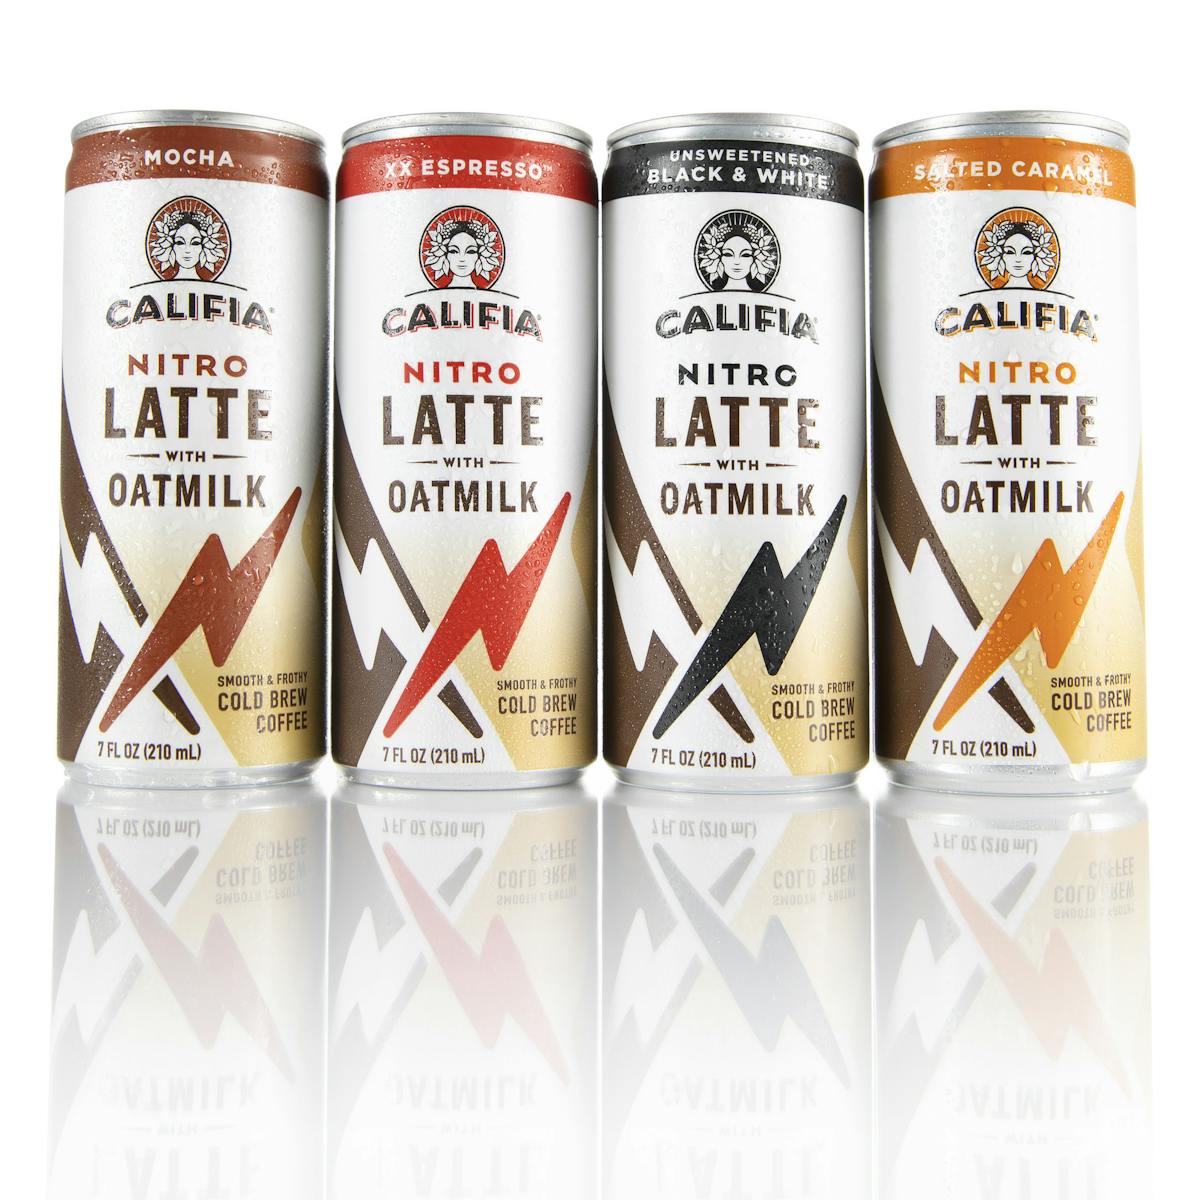 Califia Farms announces new shelf-stable, canned Nitro Draft Lattes made with allergen-friendly, gluten-free Oatmilk; available in Black &amp; White, XX Espresso, Salted Caramel, and Mocha.